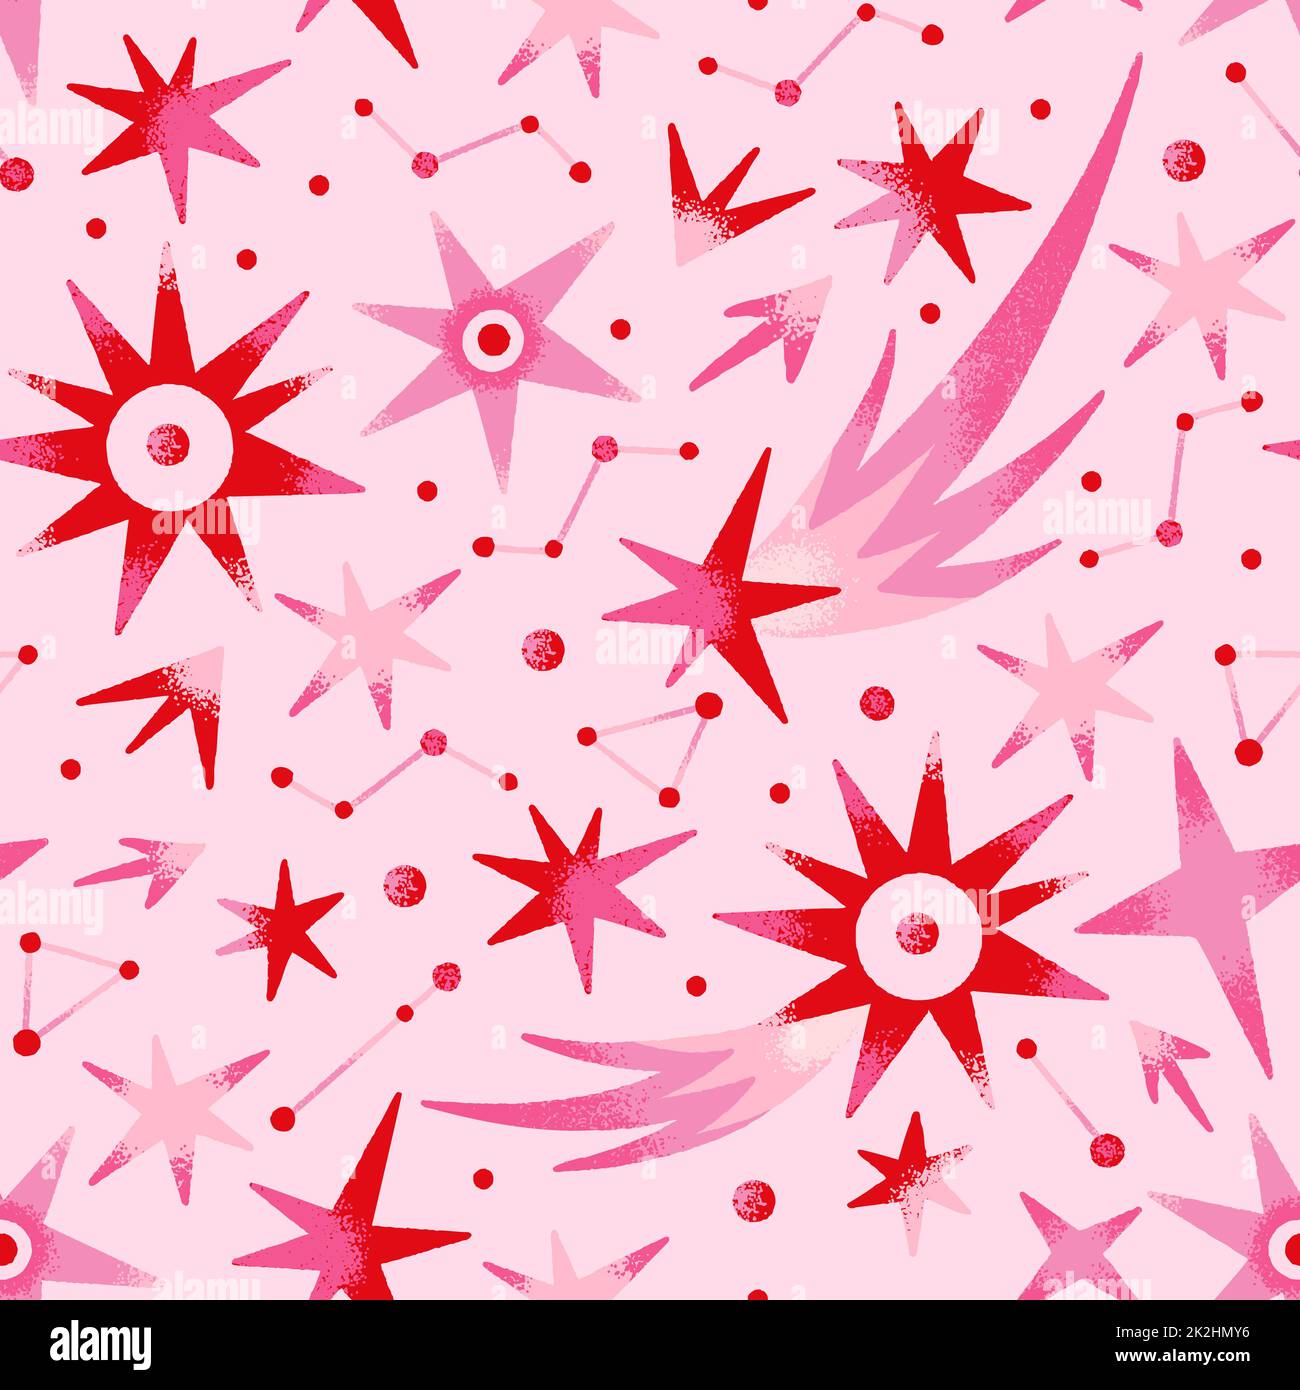 Space abstract seamless pattern with red constellations. Vector illustration on theme of astrology, astronomy Stock Photo